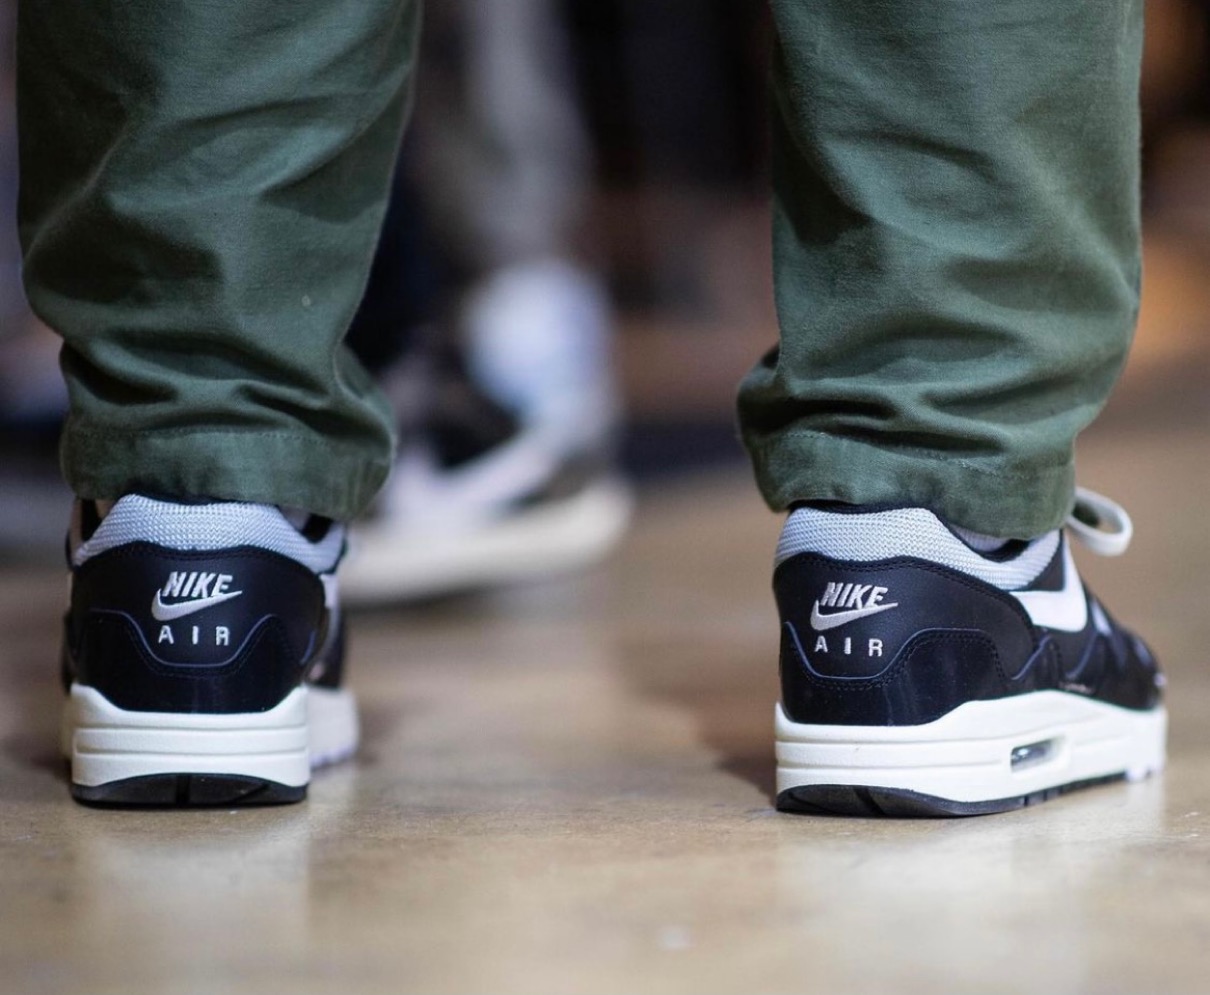 Patta × Nike Air Max 1 The Wave “Black”が12月10日より発売予定 | UP 